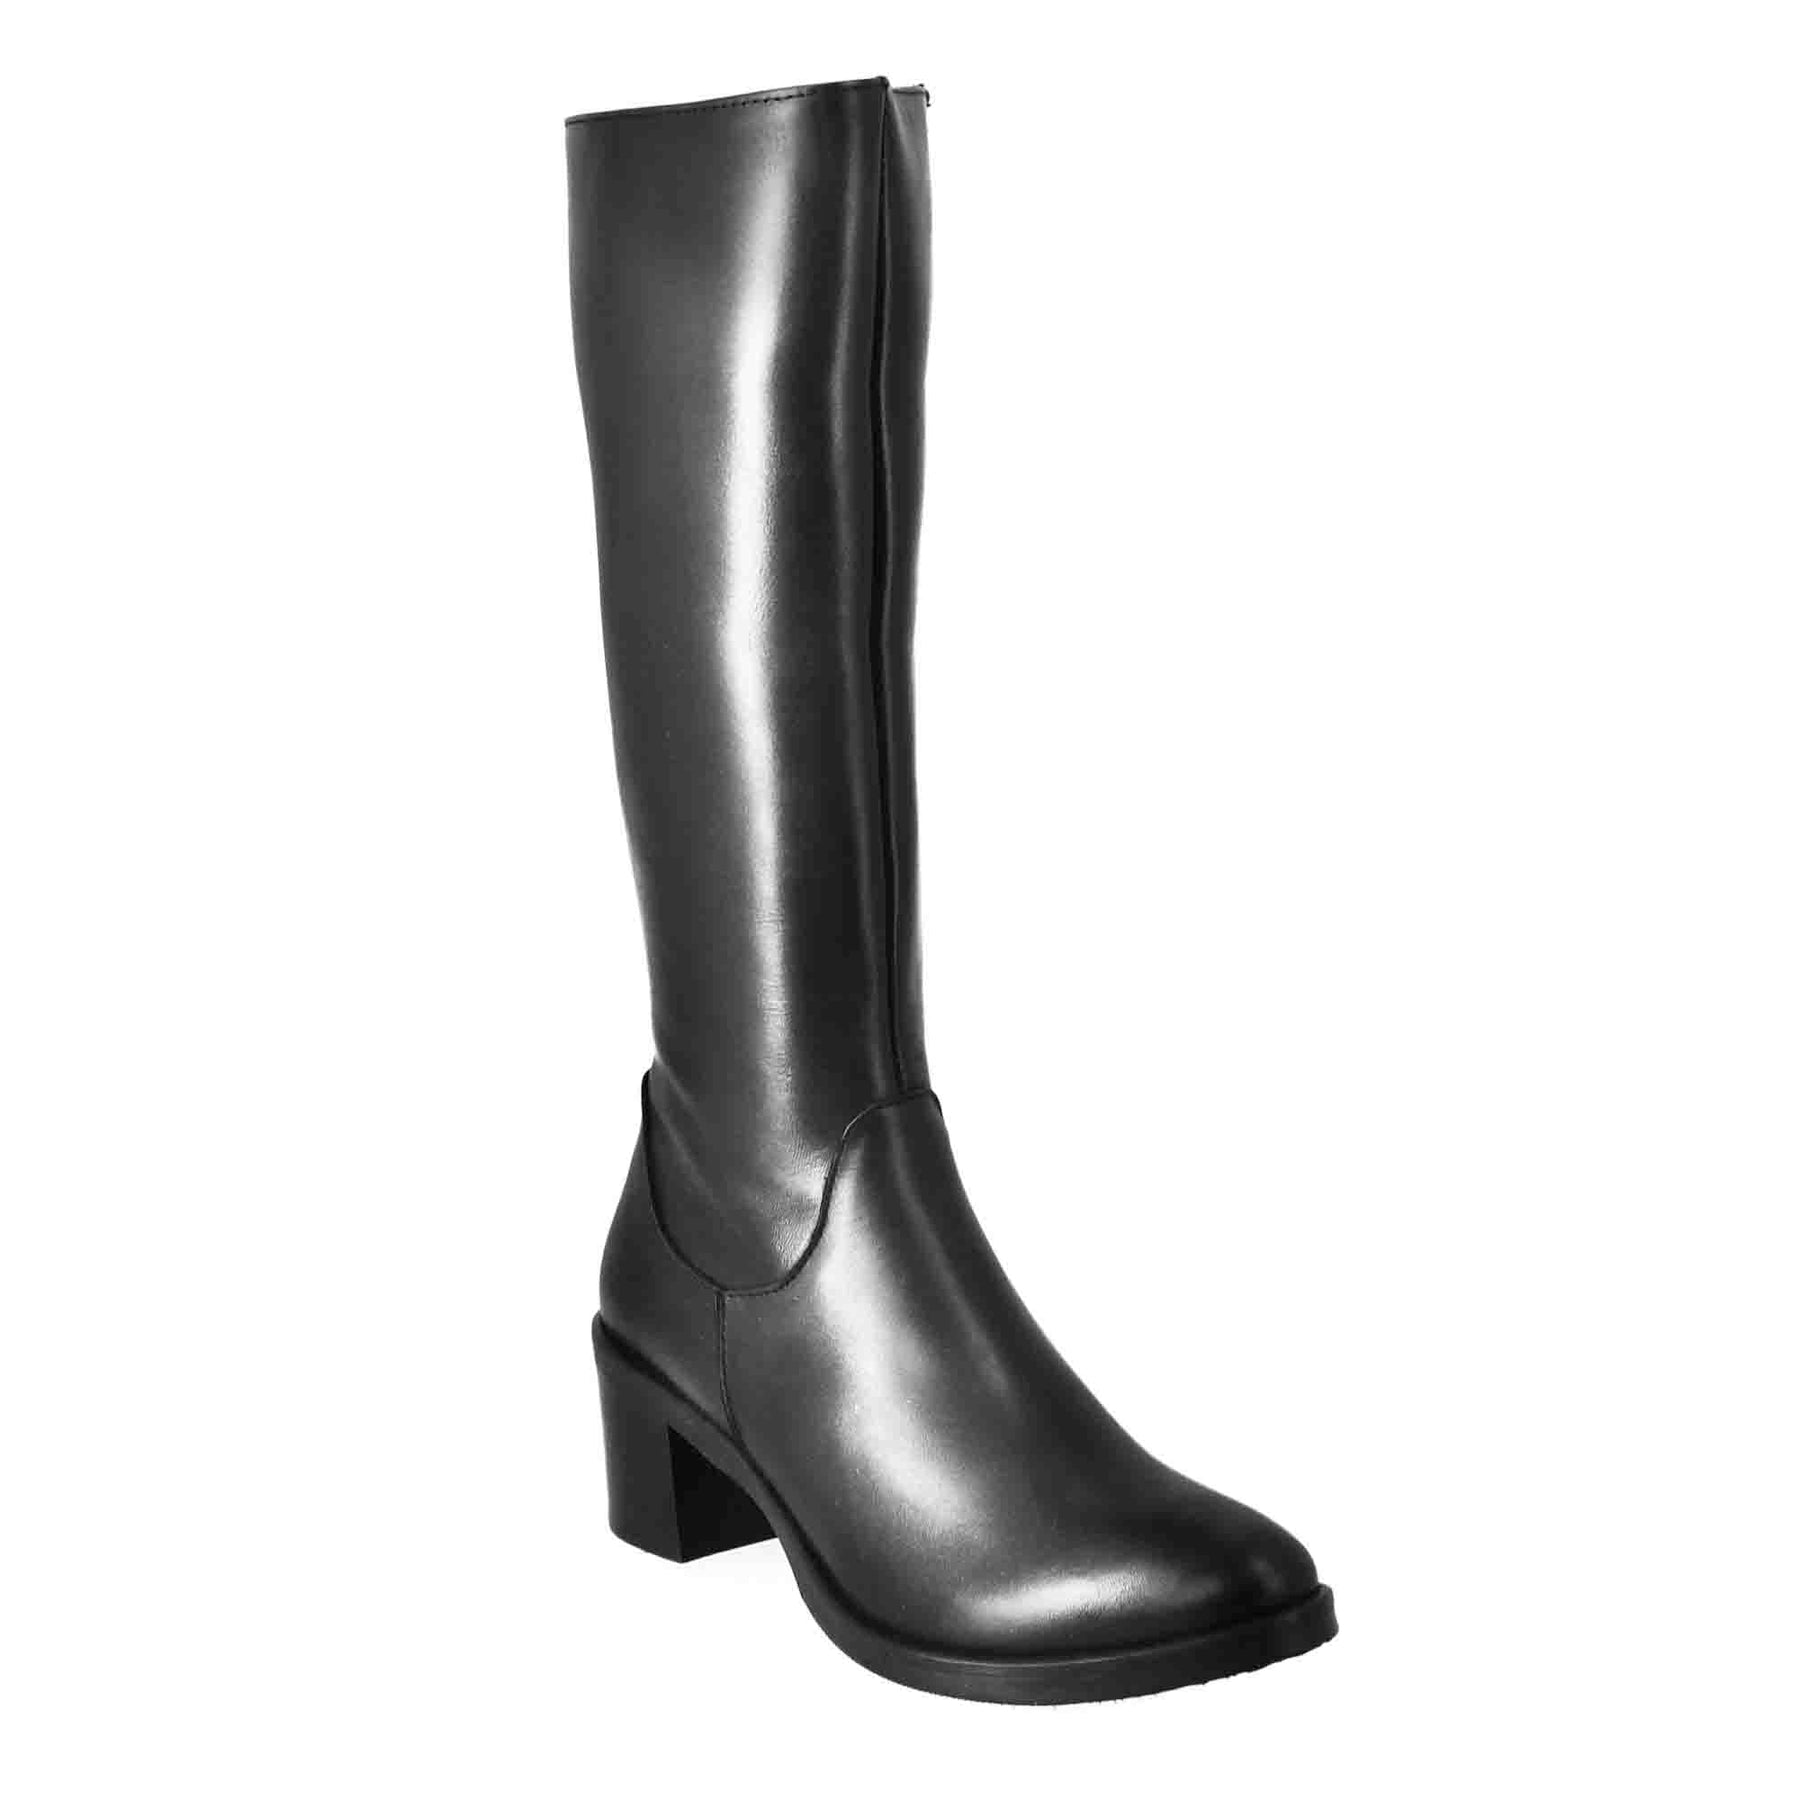 Smooth women's knee-high boots with medium heel in black leather